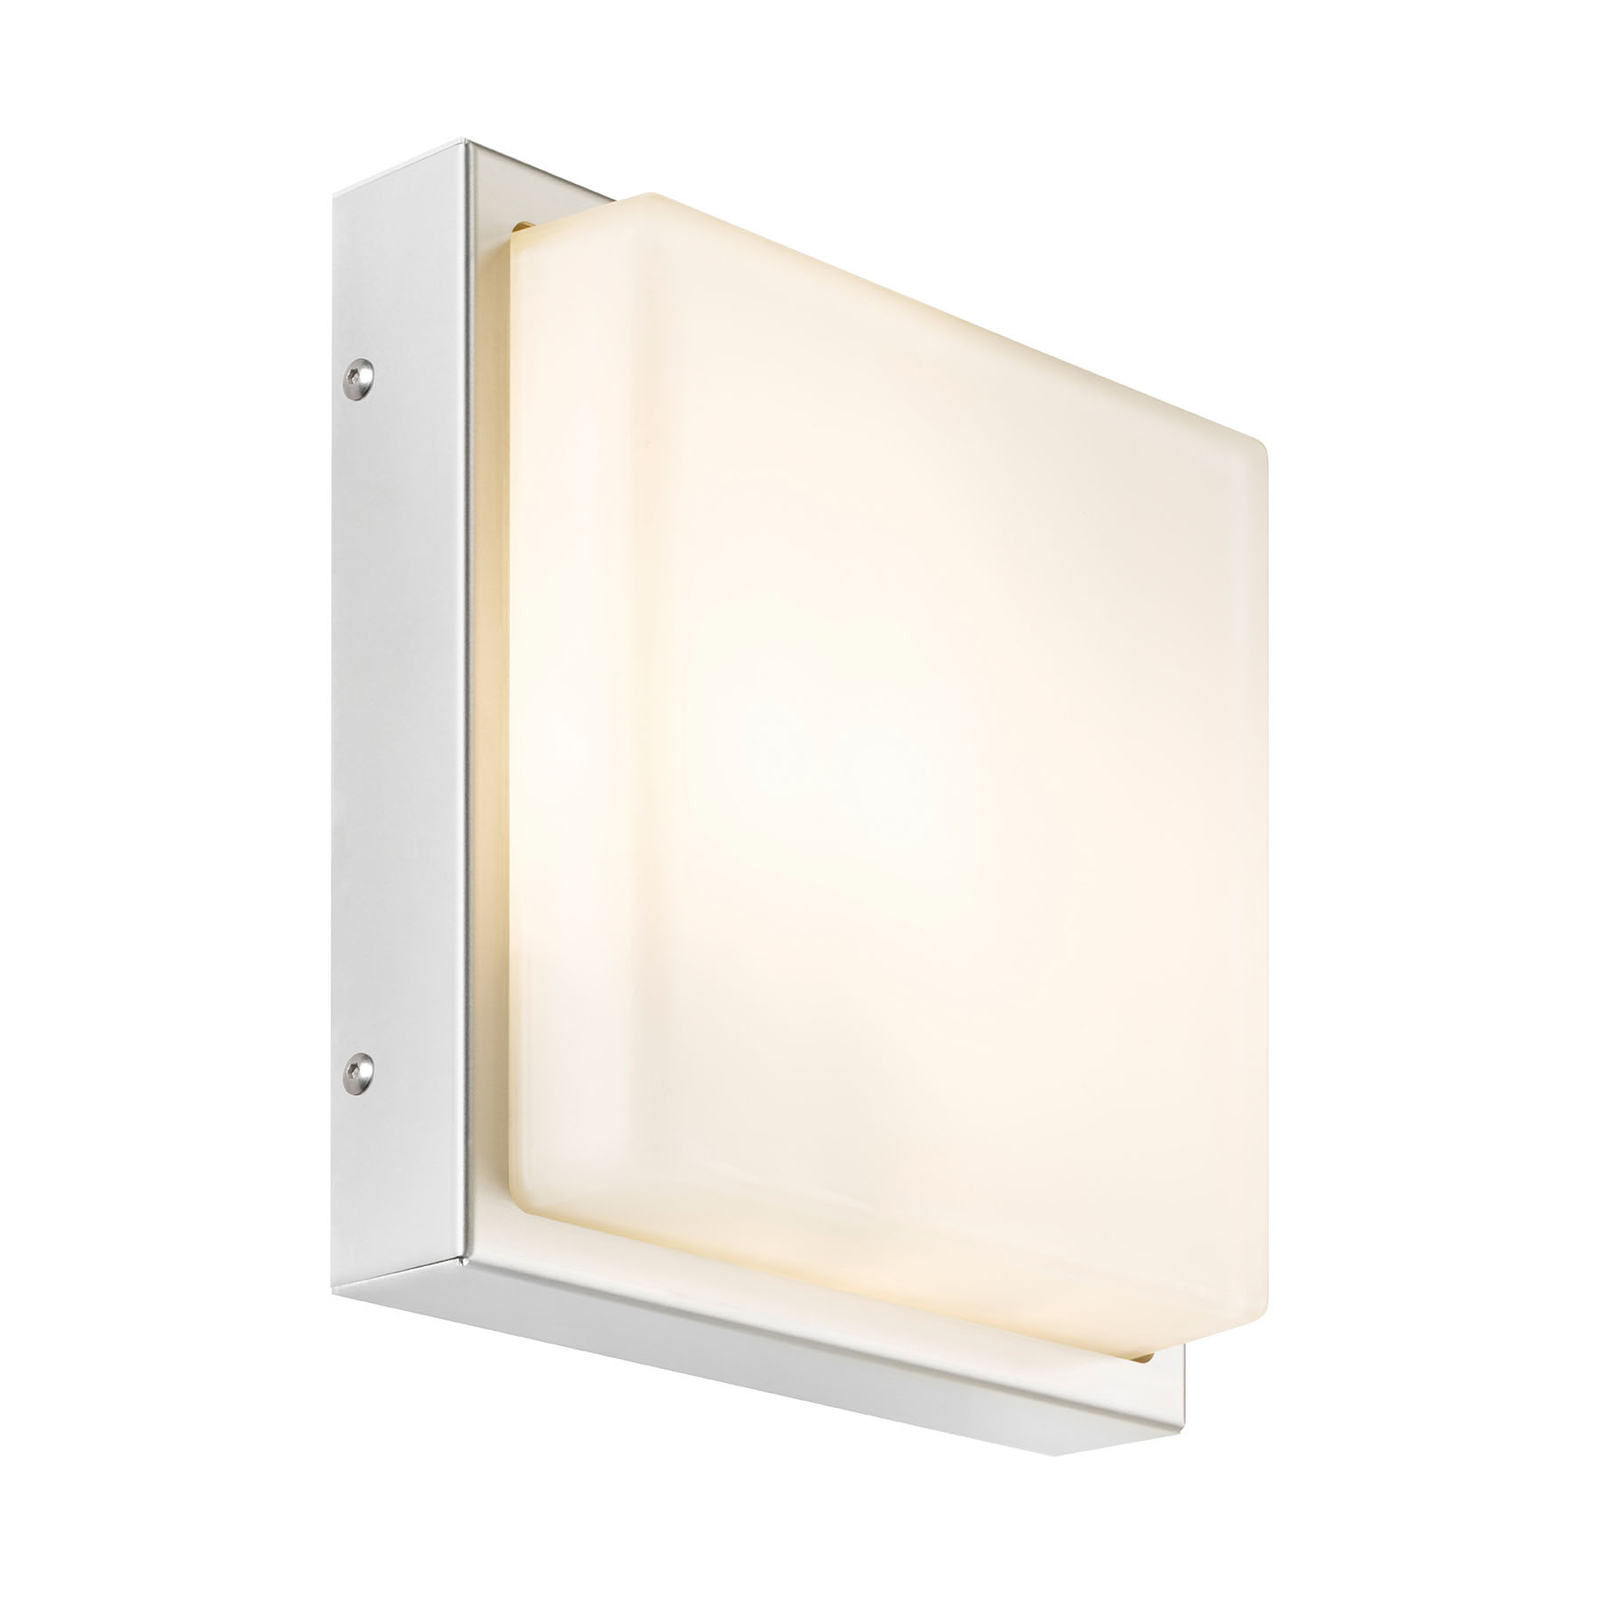 046 LED outdoor wall light, stainless steel